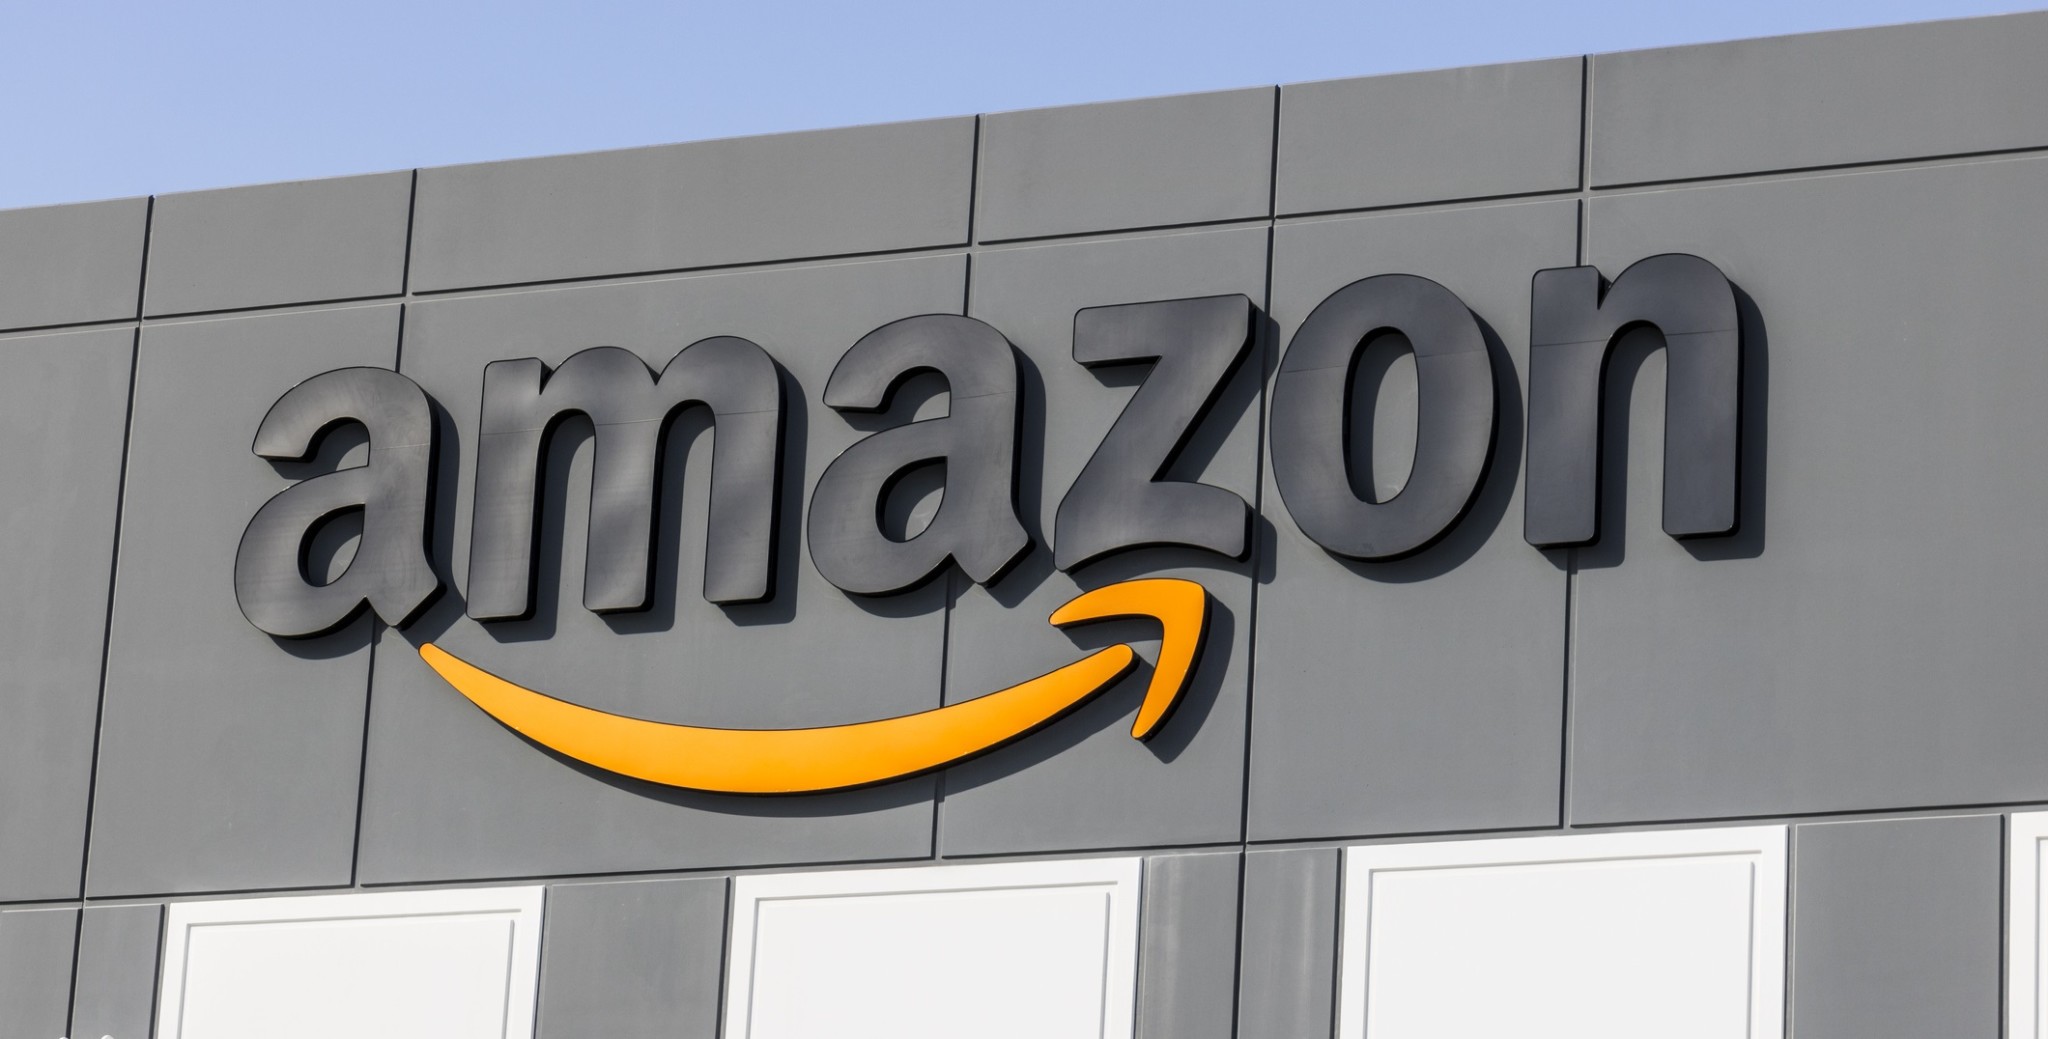 Multiple Amazon Sellers Are Convicted of Price Fixing DVDs on Amazon & Must Pay $795,000 in Fines Along With Jail Time